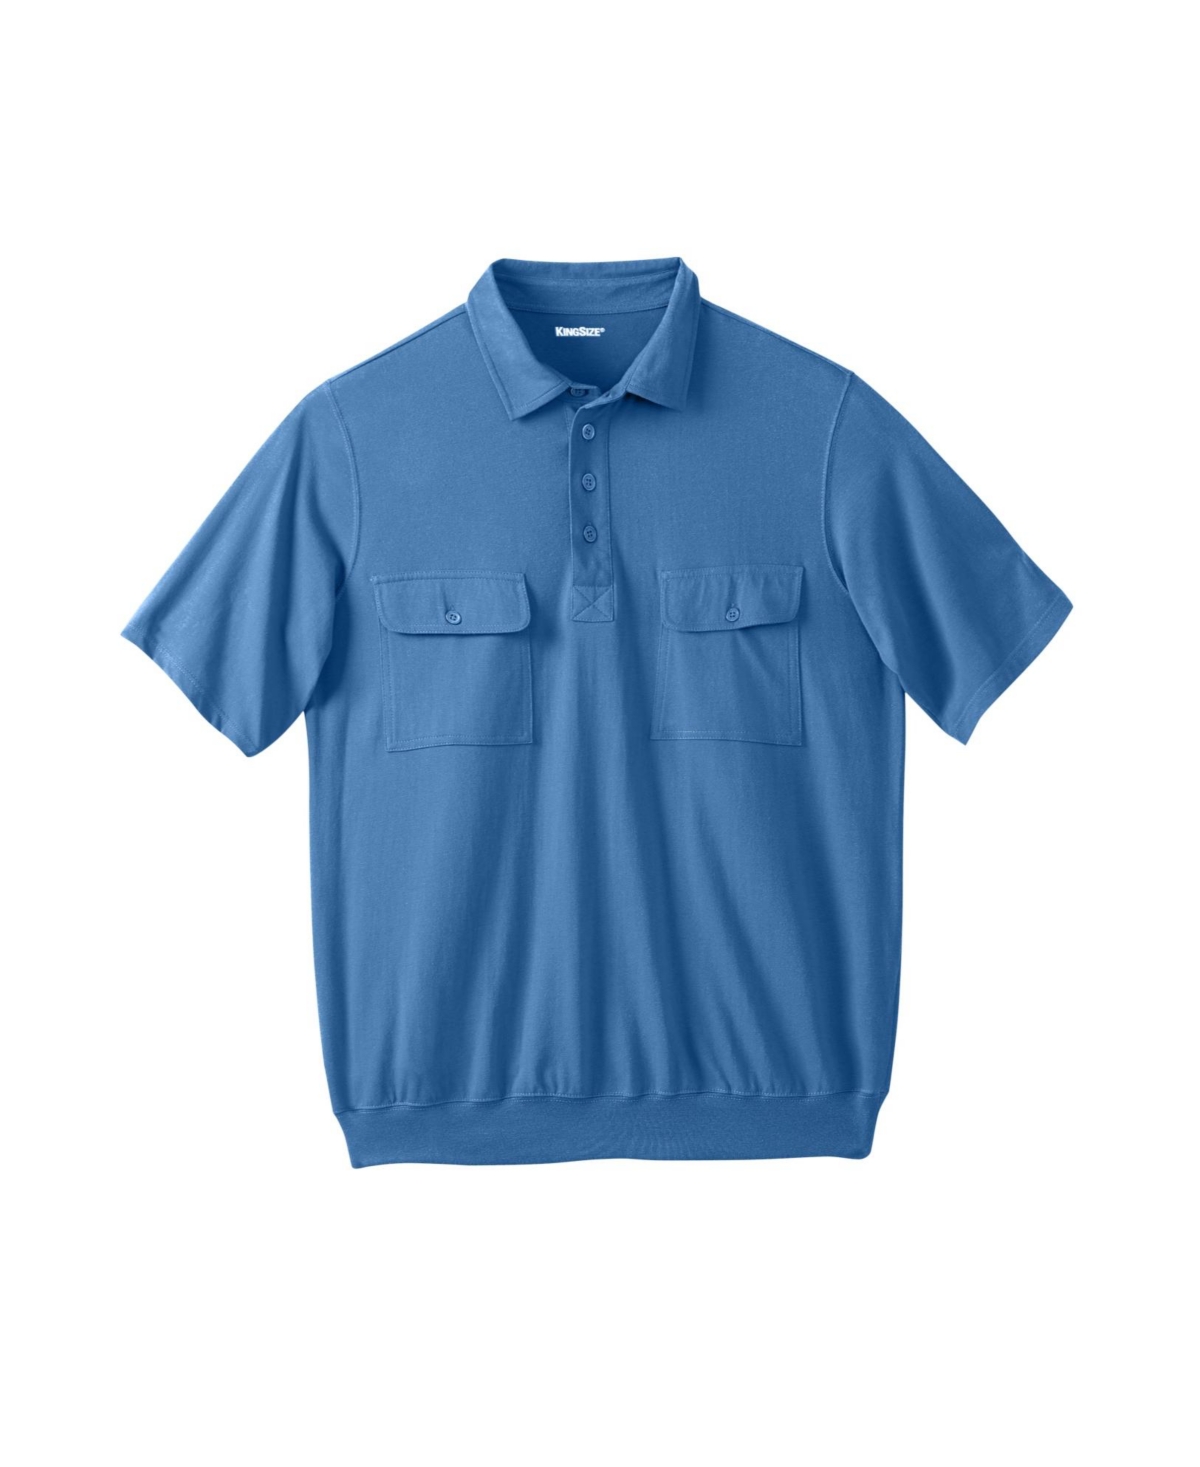 Big & Tall Jersey Double Pocket Banded Bottom Polo - Classic blue